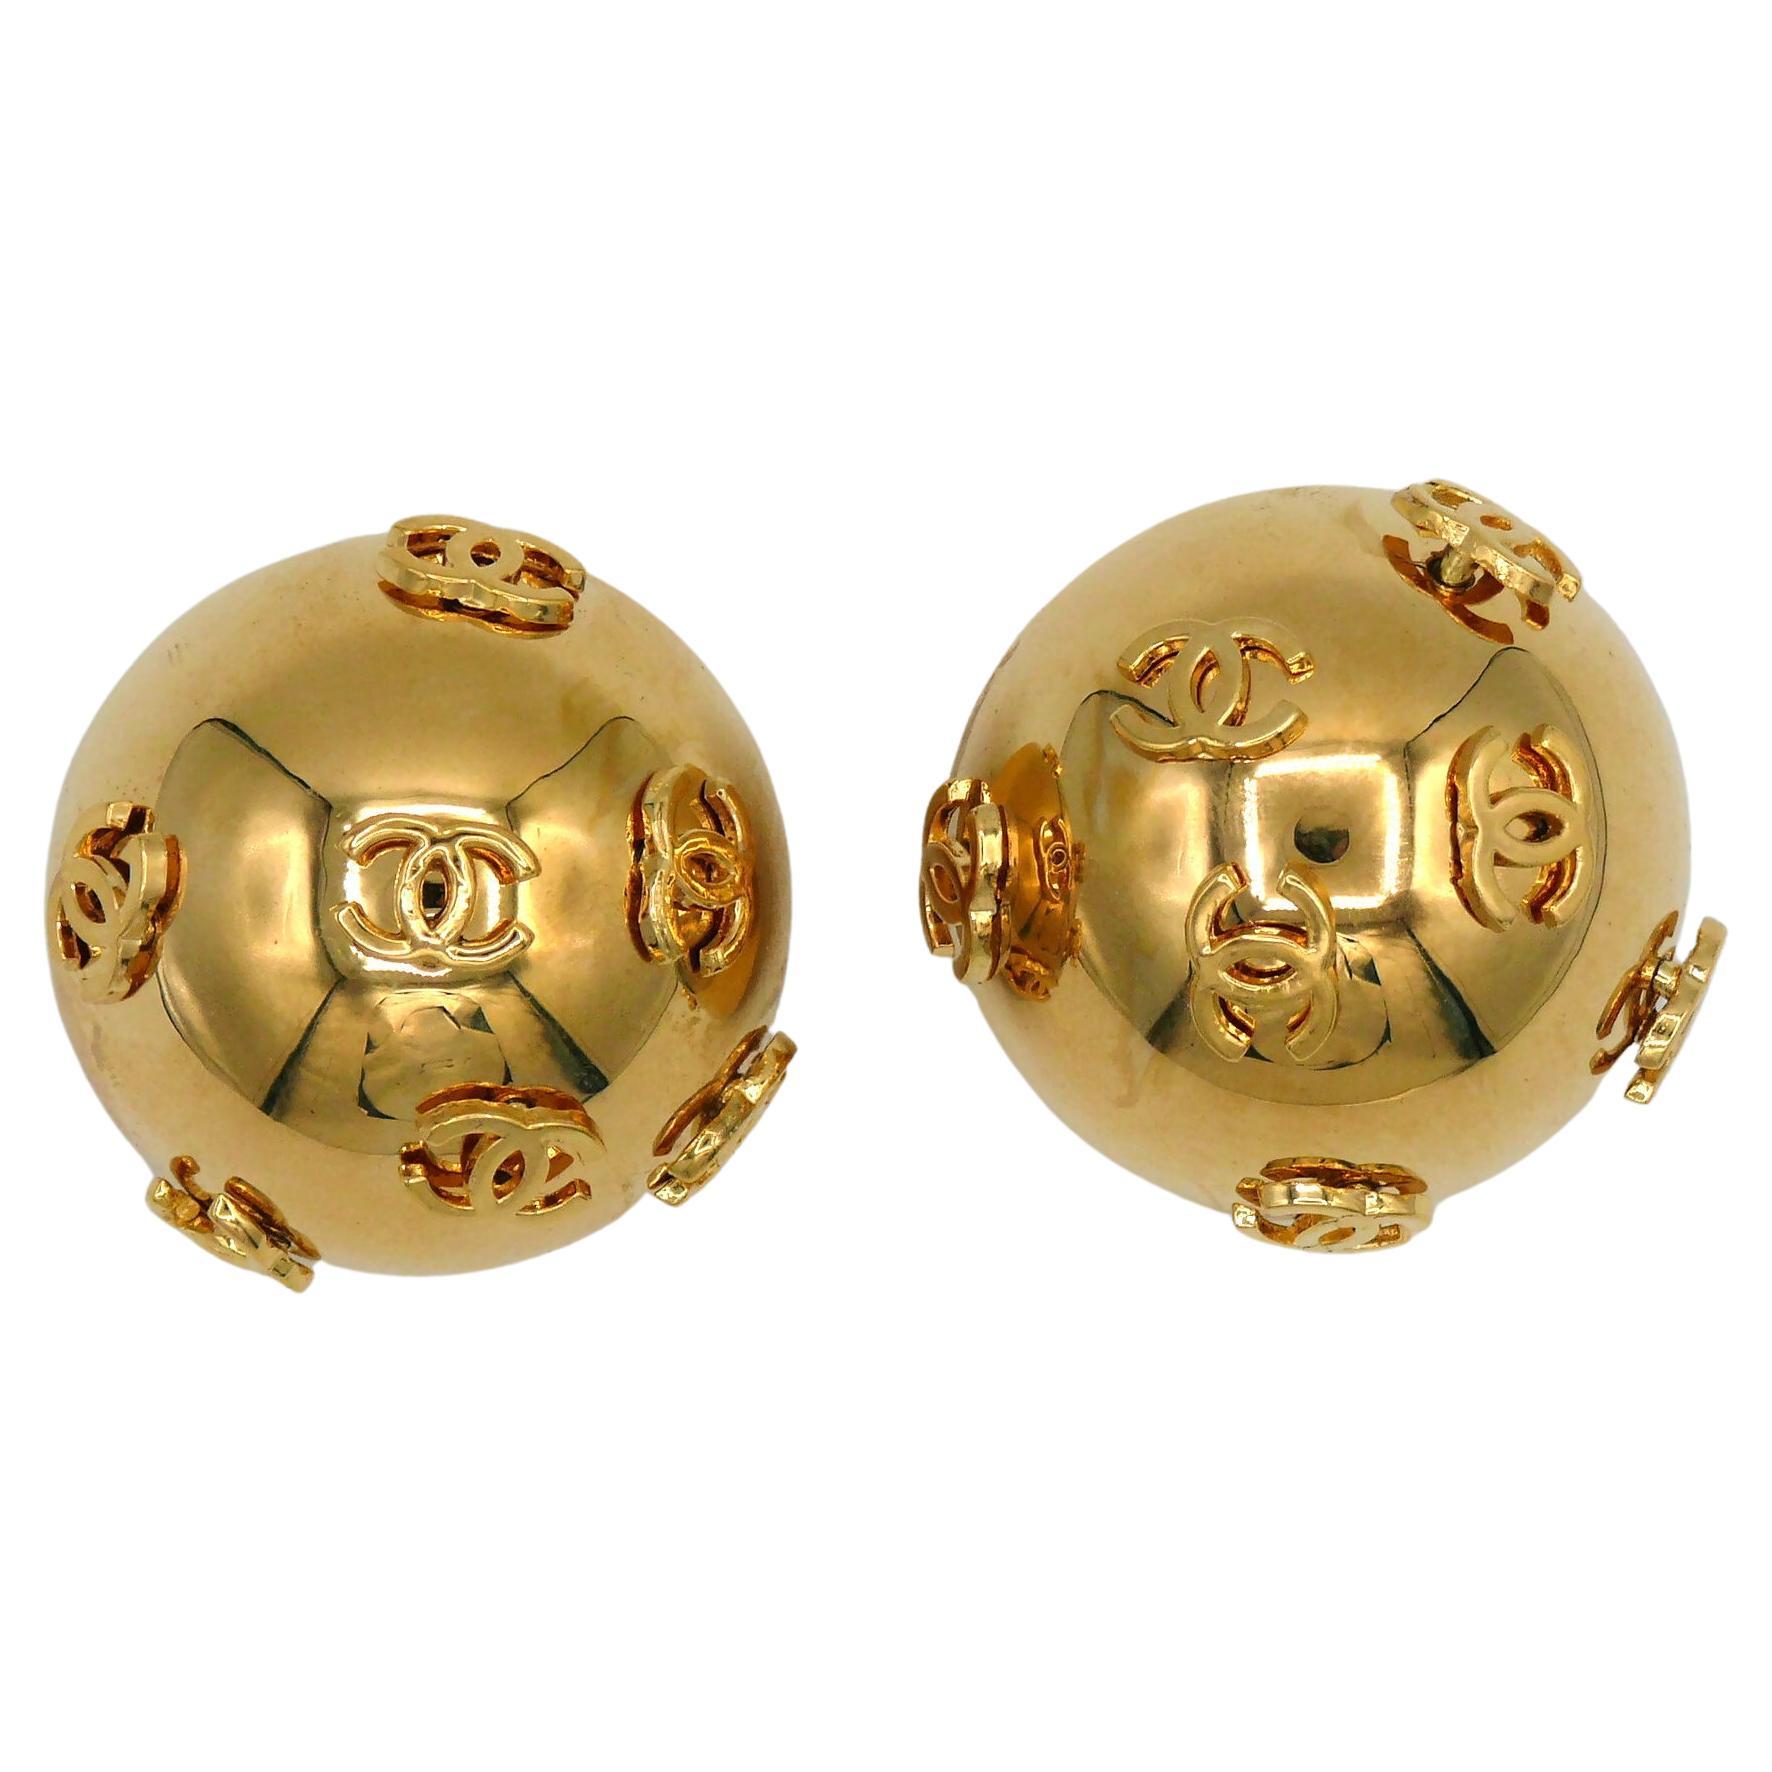 CHANEL by KARL LAGERFELD Vintage Oversized Dome CC Logos Clip-On Earrings, 1992 For Sale